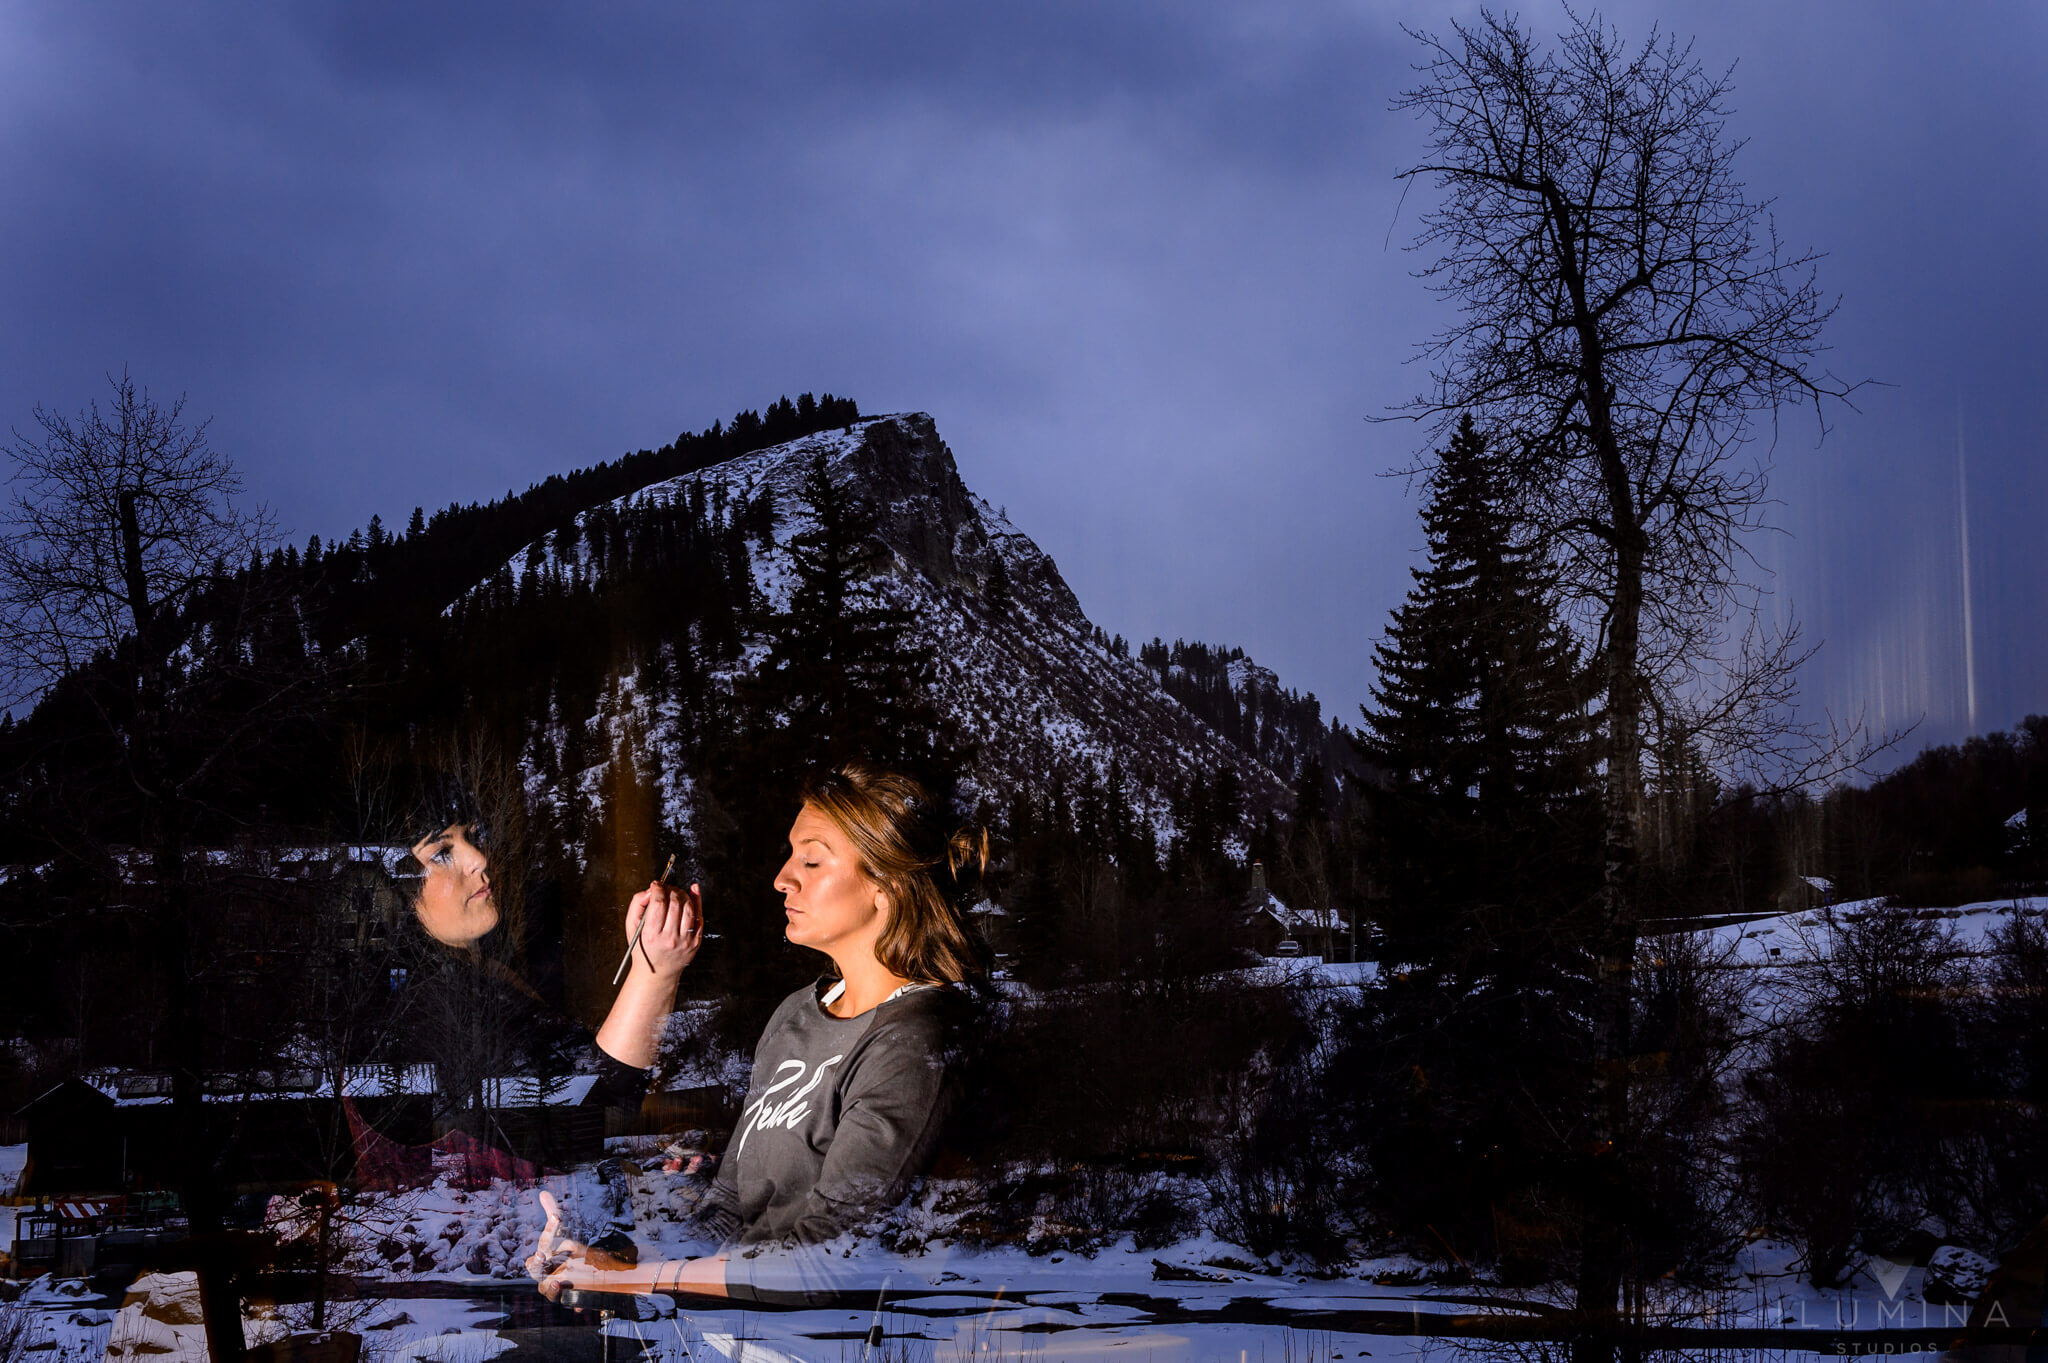 Color double exposure photo of women applying makeup with dusk mountain scene in background